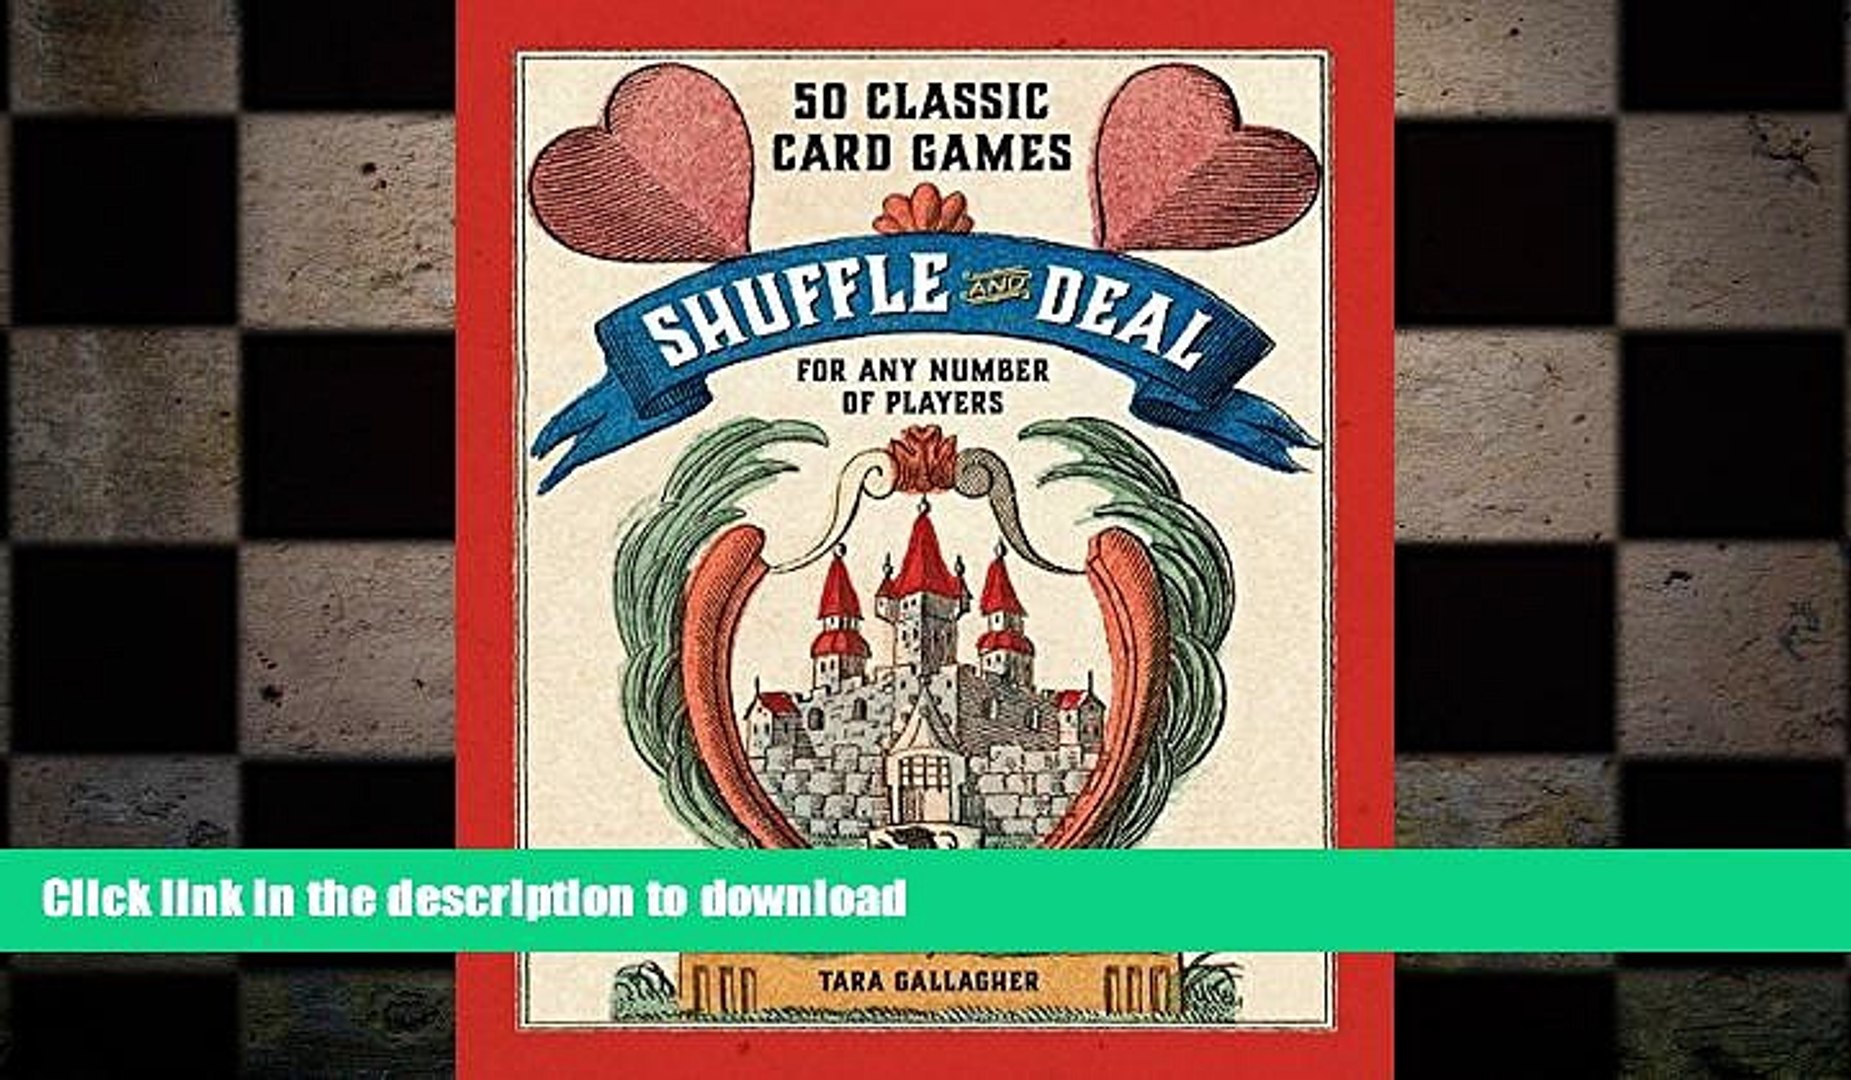 READ  Shuffle and Deal: 50 Classic Card Games for Any Number of Players  BOOK ONLINE